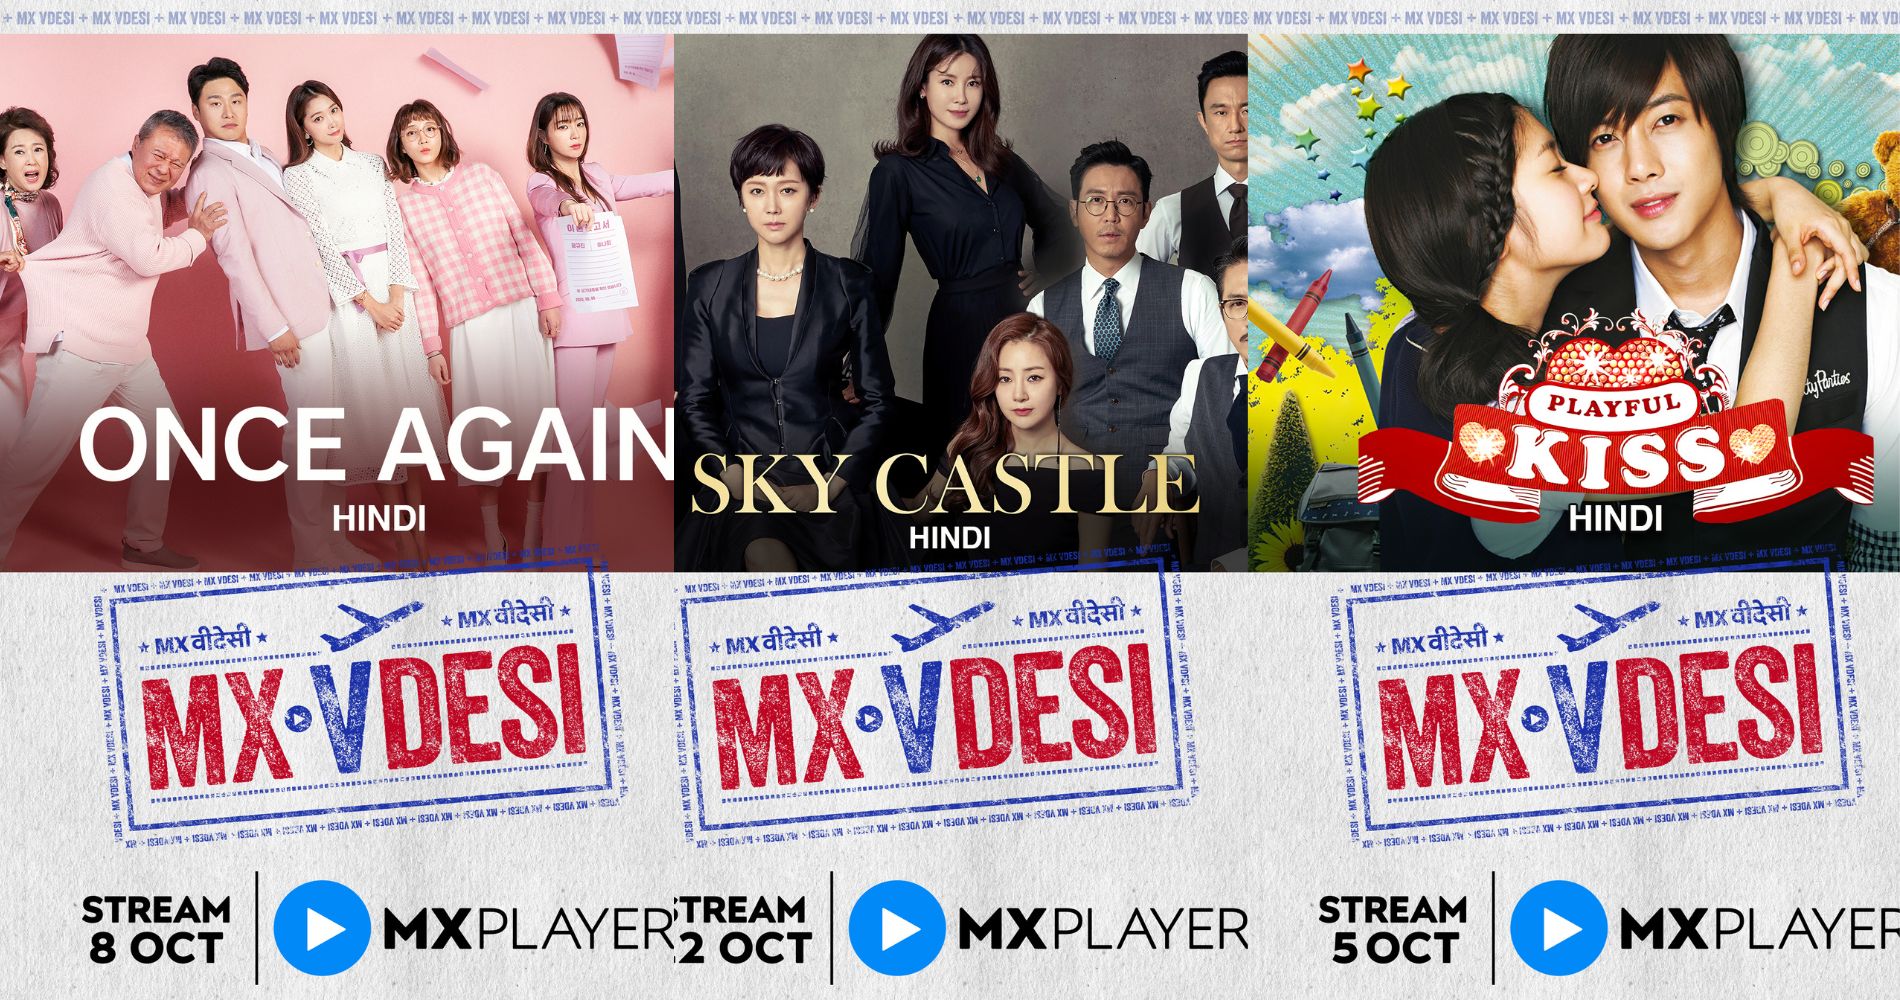 MX Player presents a huge festive bonanza with their October slate